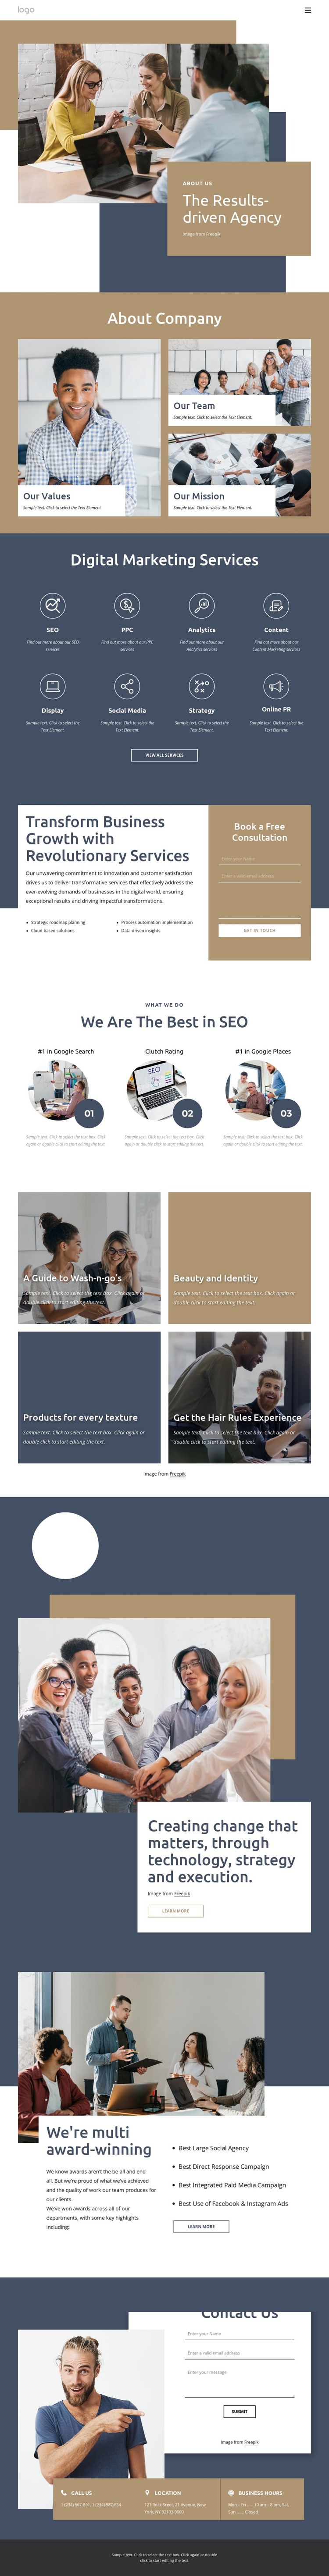 The results-driven agency Web Design